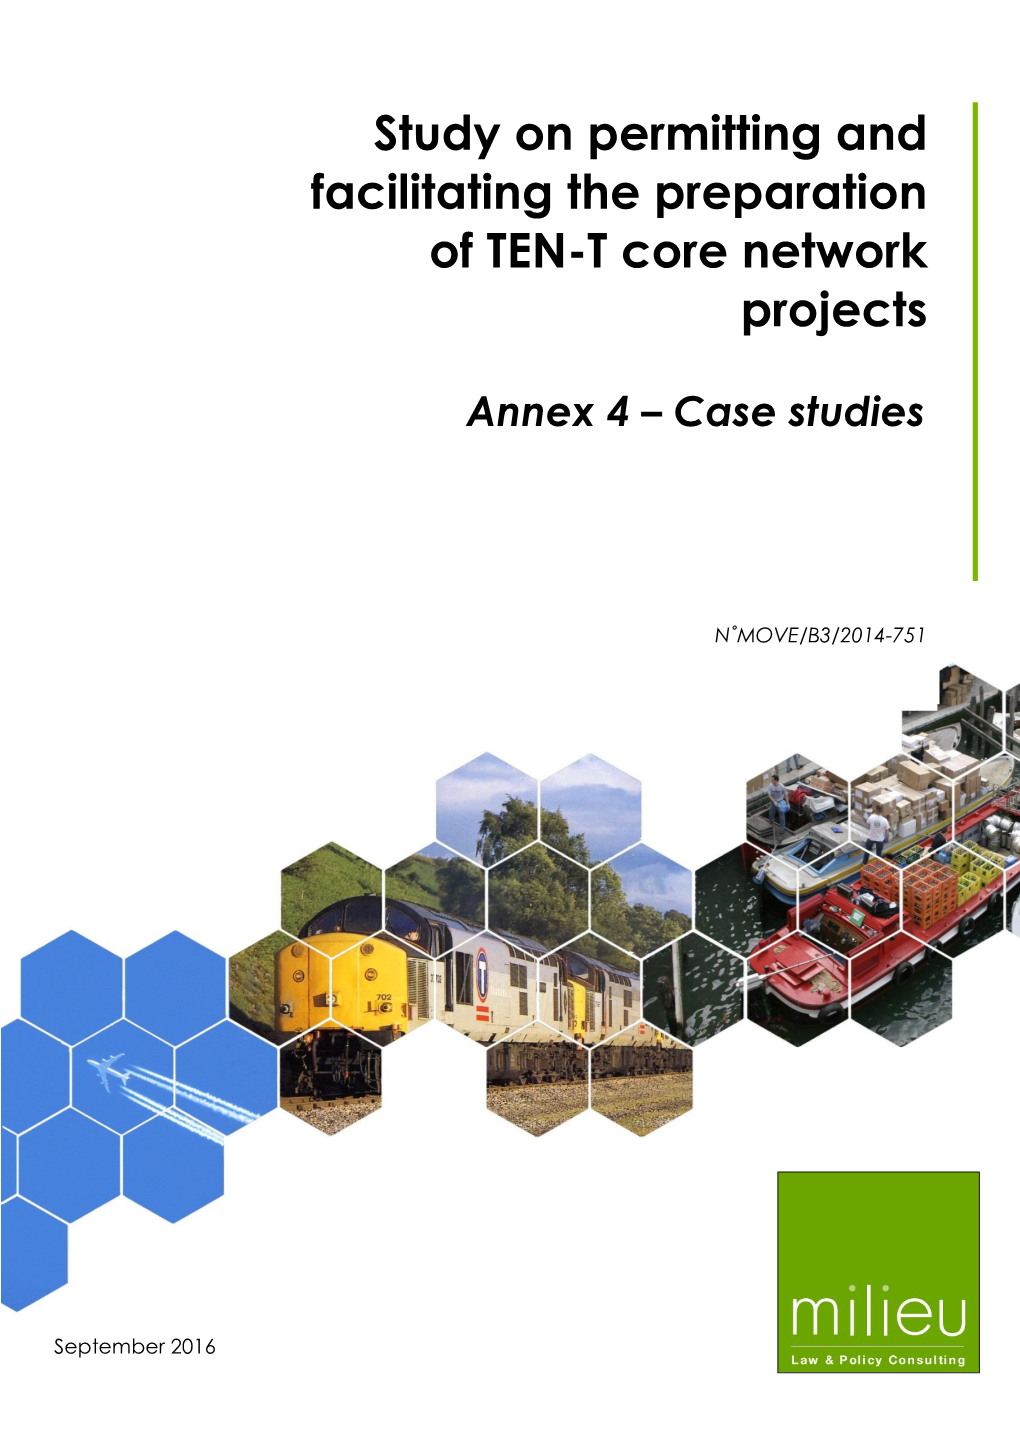 Study on Permitting and Facilitating the Preparation of TEN-T Core Network Projects